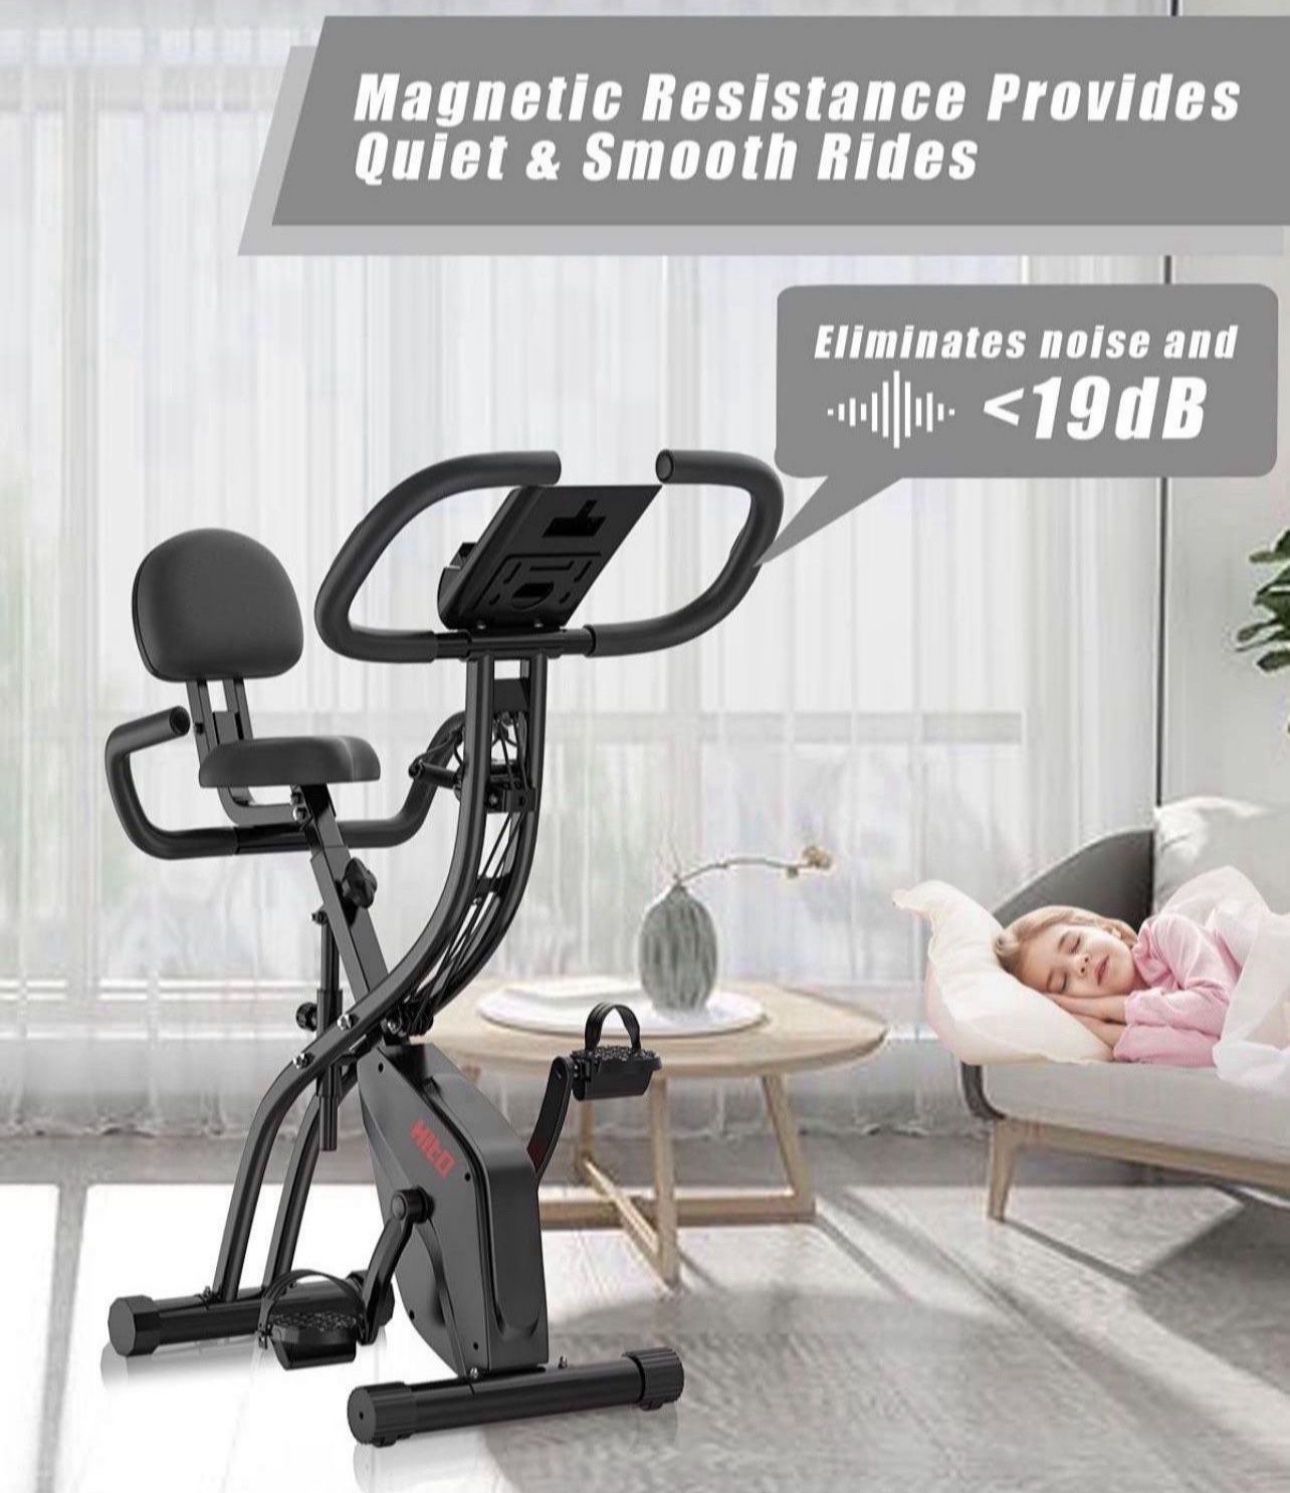 Folding Exercise Bike with Arm Resistance Bands, Magnetic Upright Indoor Cycling Bike Stationary for Home Gym & Cardio Workout